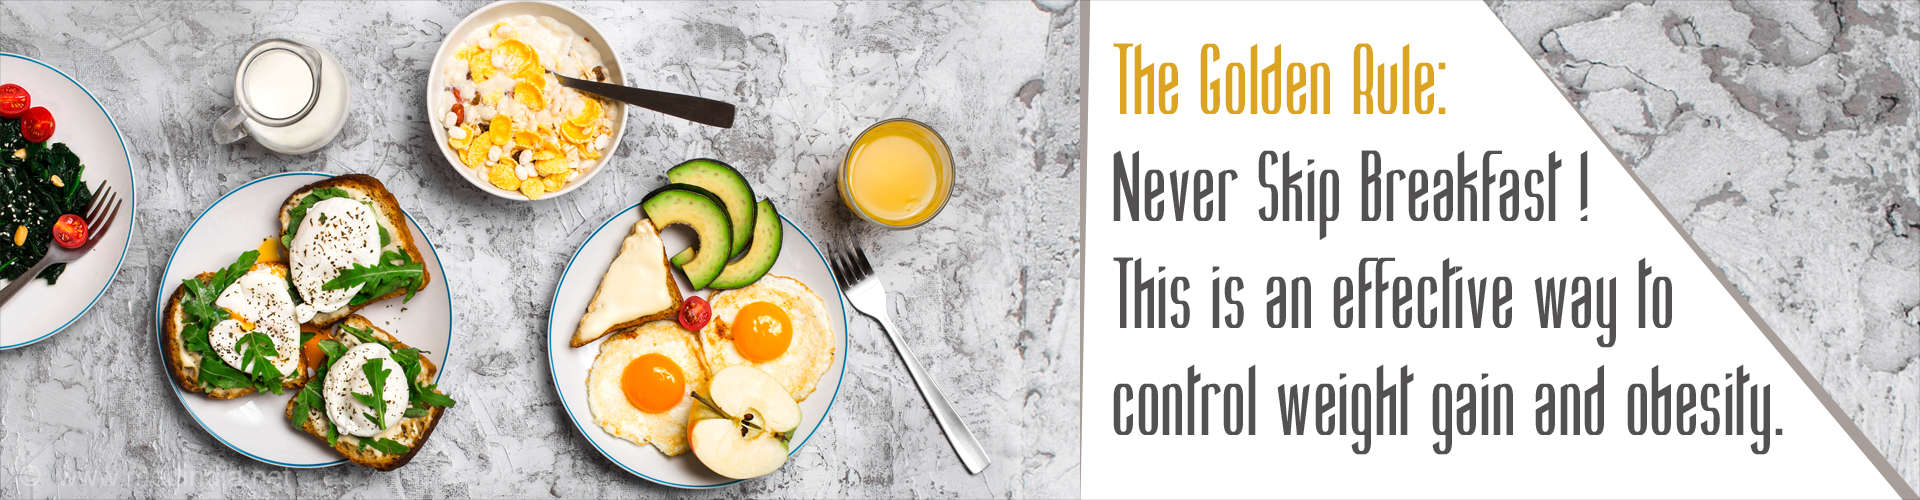 The Golden Rule: Never Skip Breakfast ! This is an effective way to control weight gain and obesity.